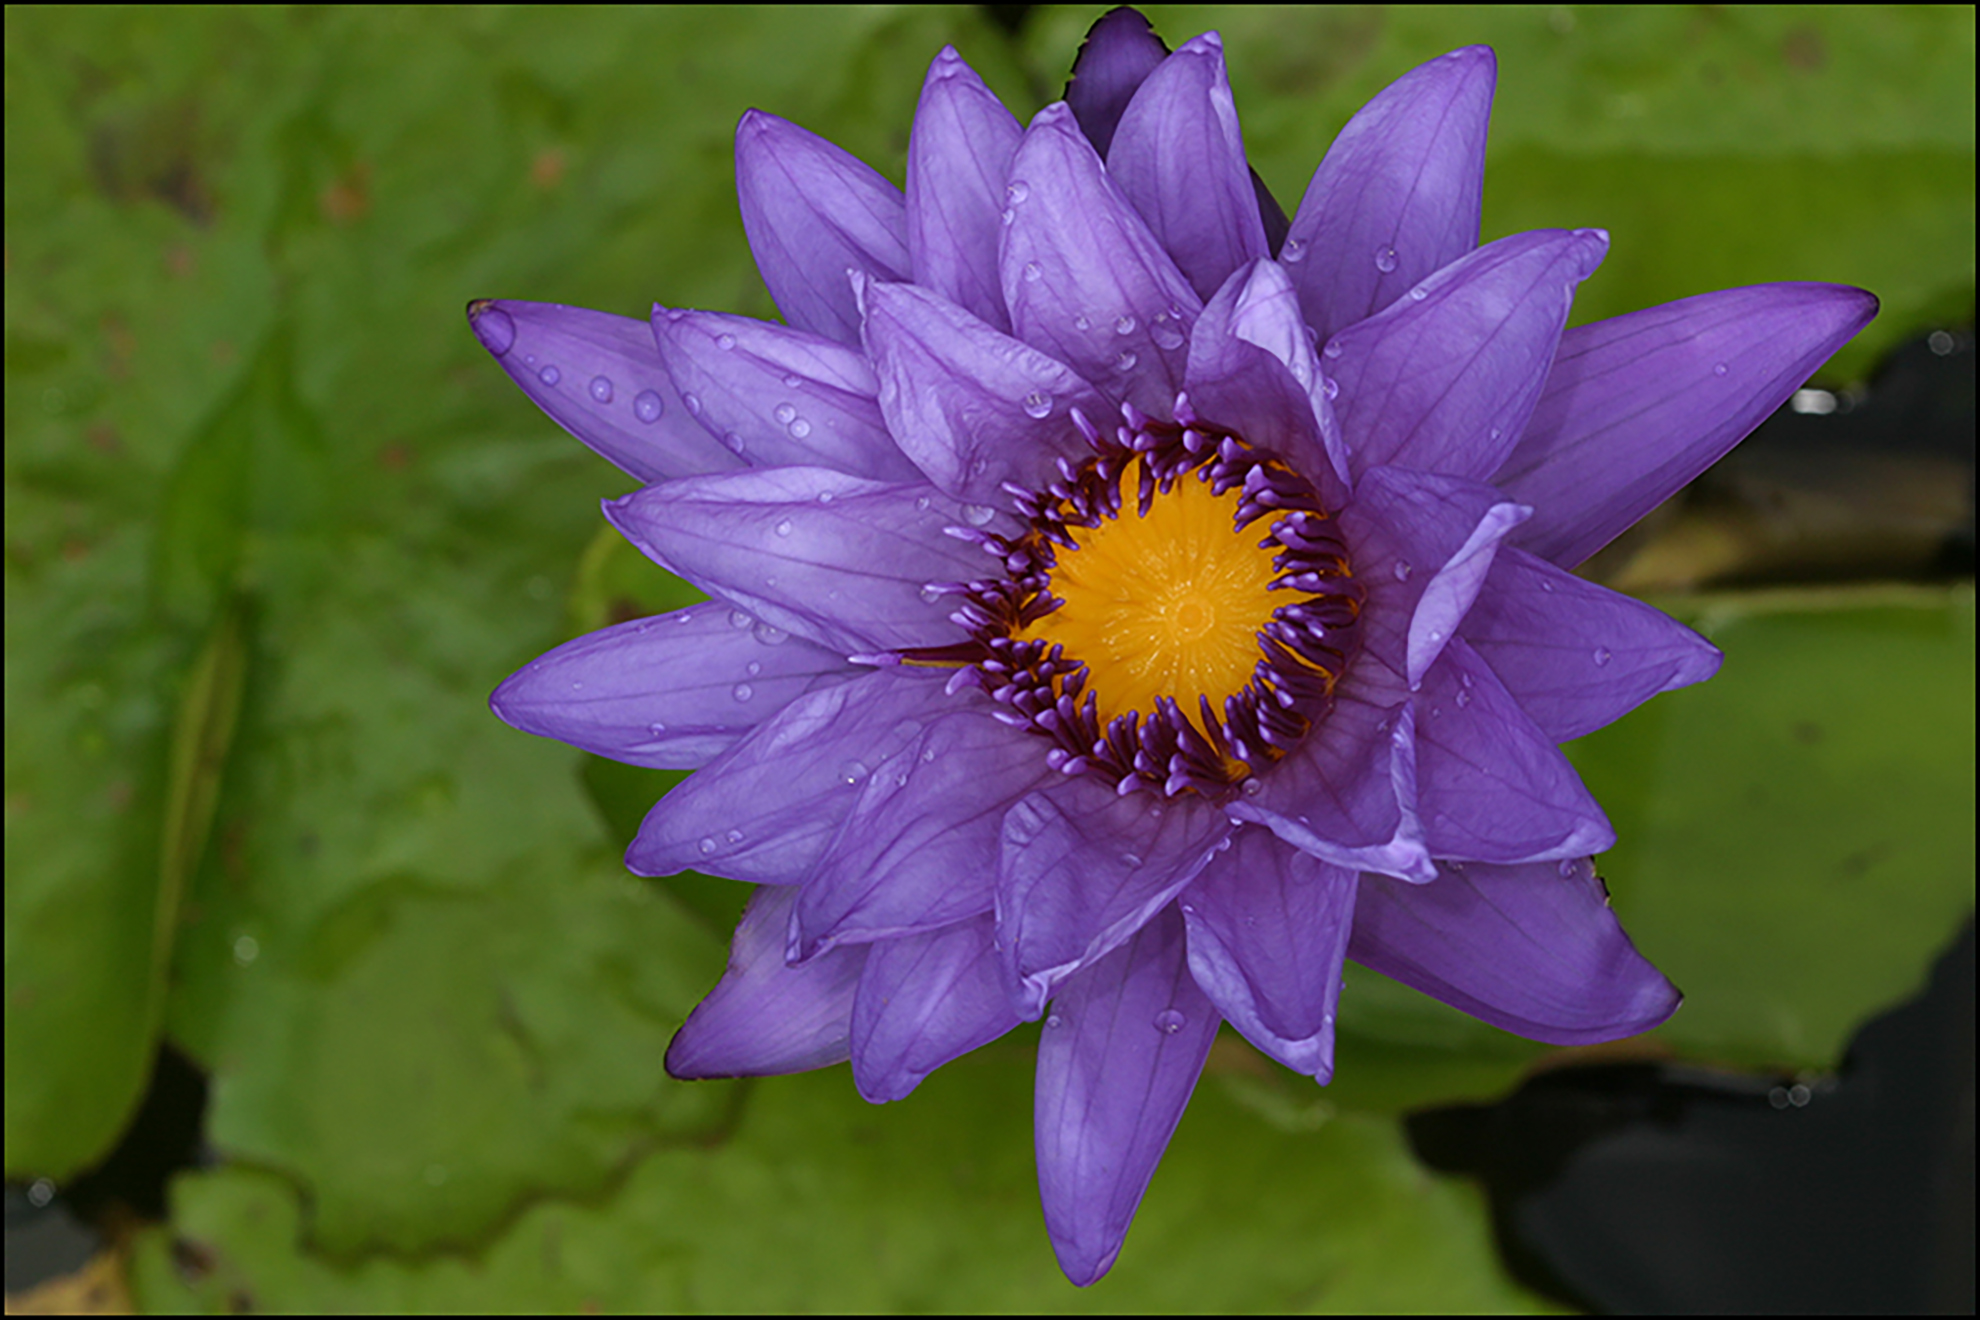 Macro image of a bright purple flower and a yellow center